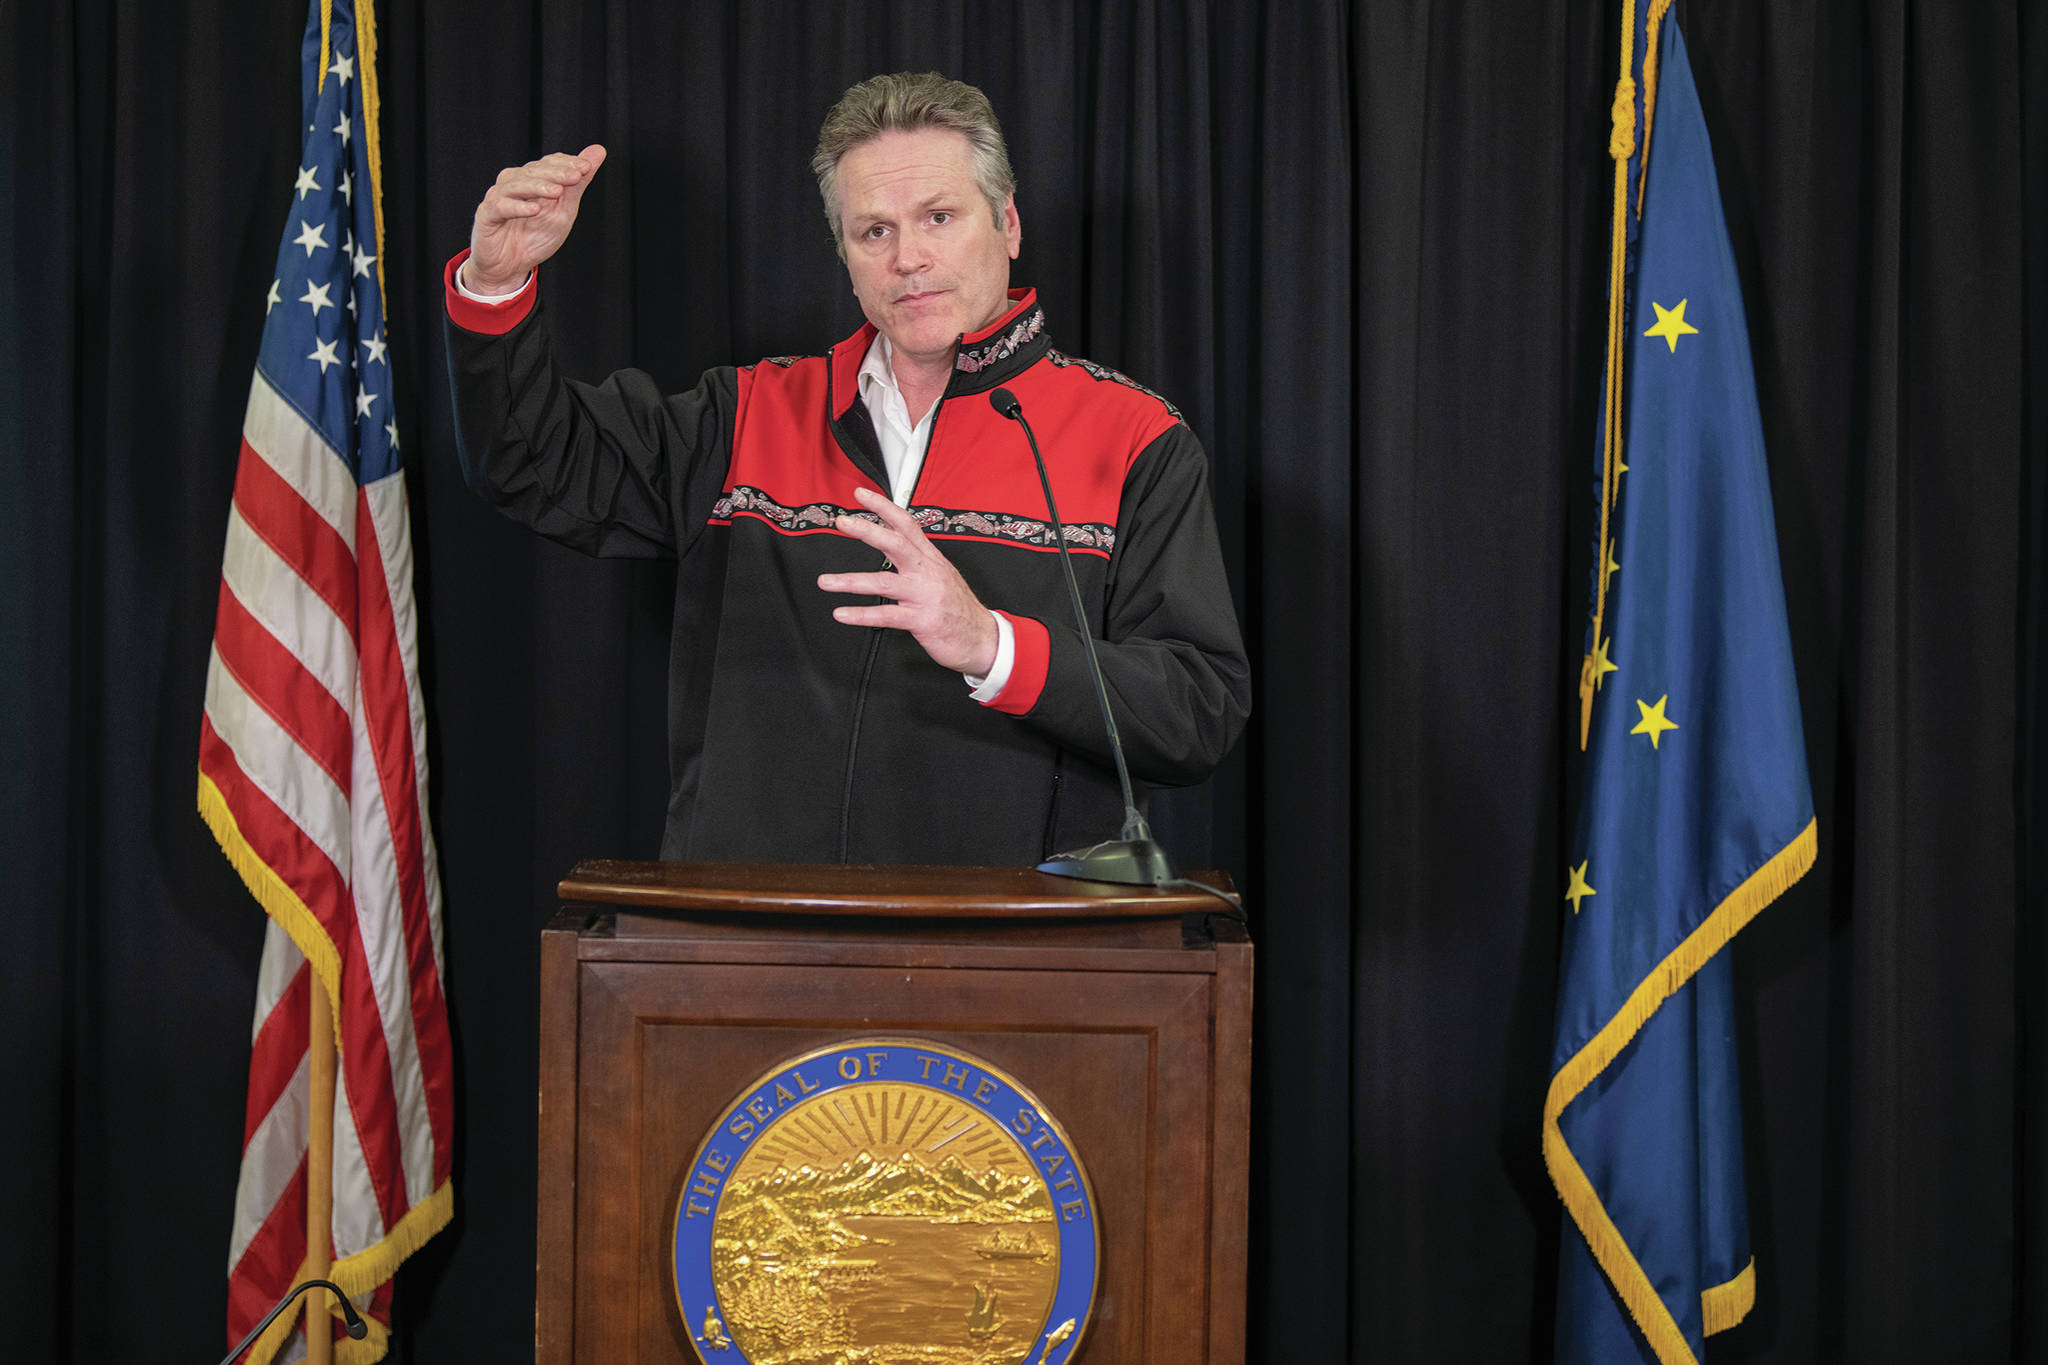 Dunleavy unveils plan to disburse $1.25B in federal relief funds